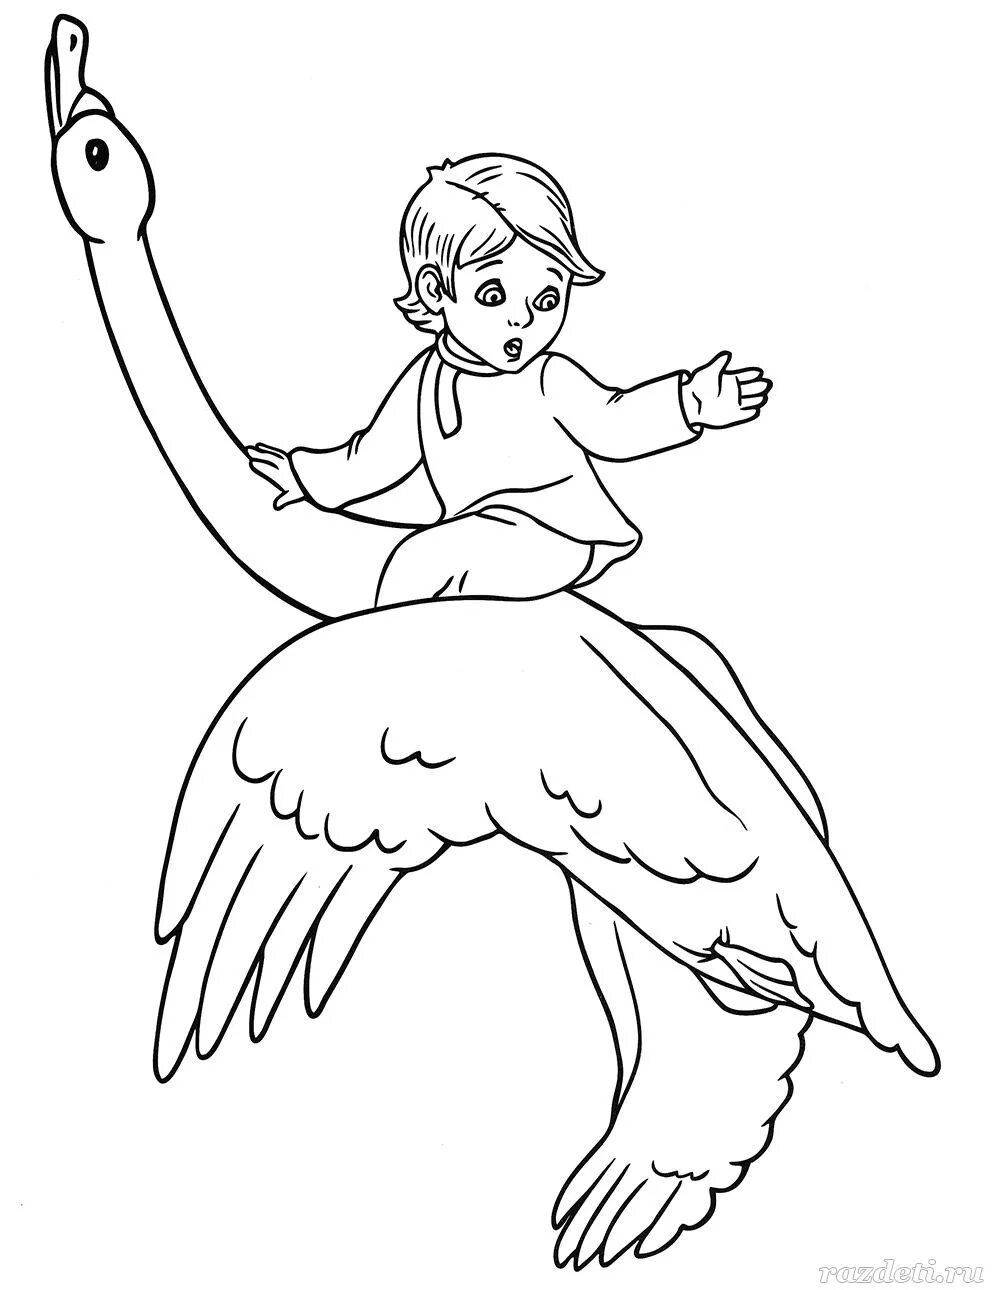 Colorful swan geese coloring pages for preschoolers